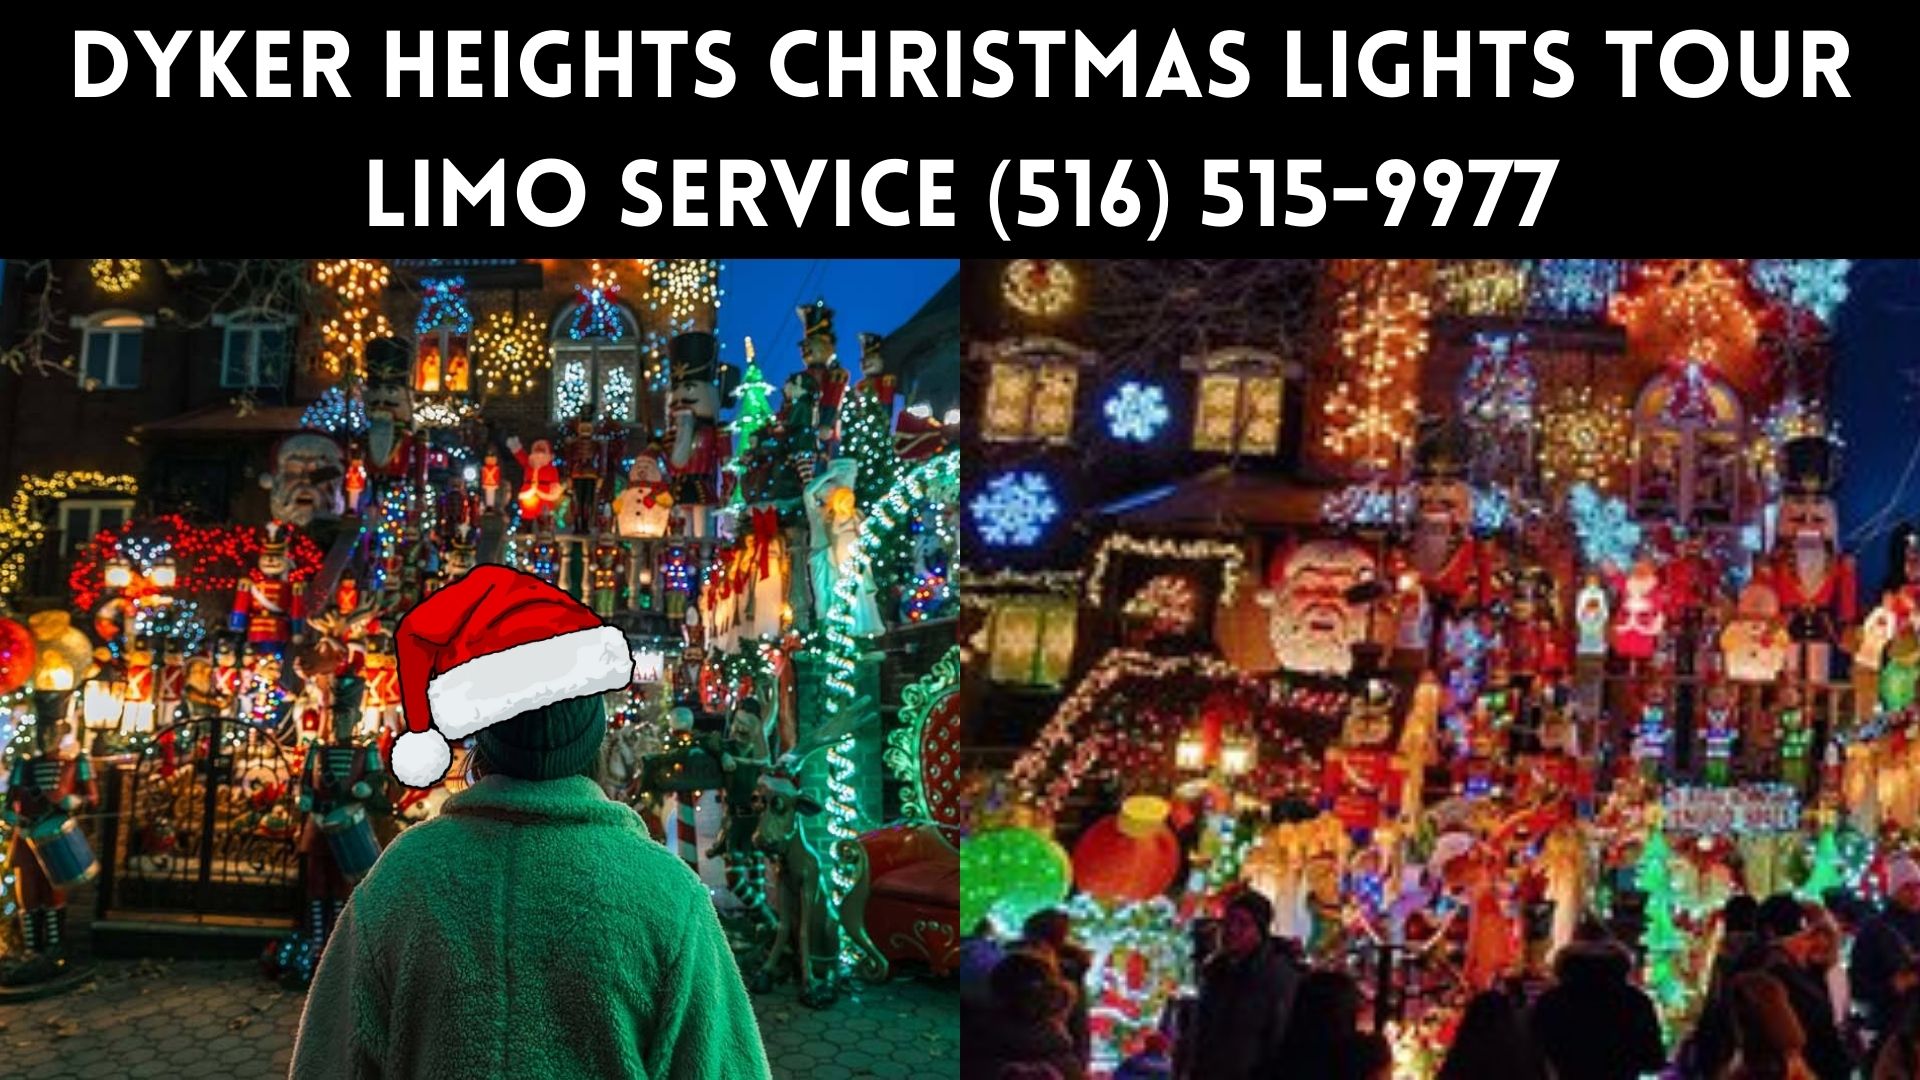 Dyker Heights Christmas Light Tour Limo Service